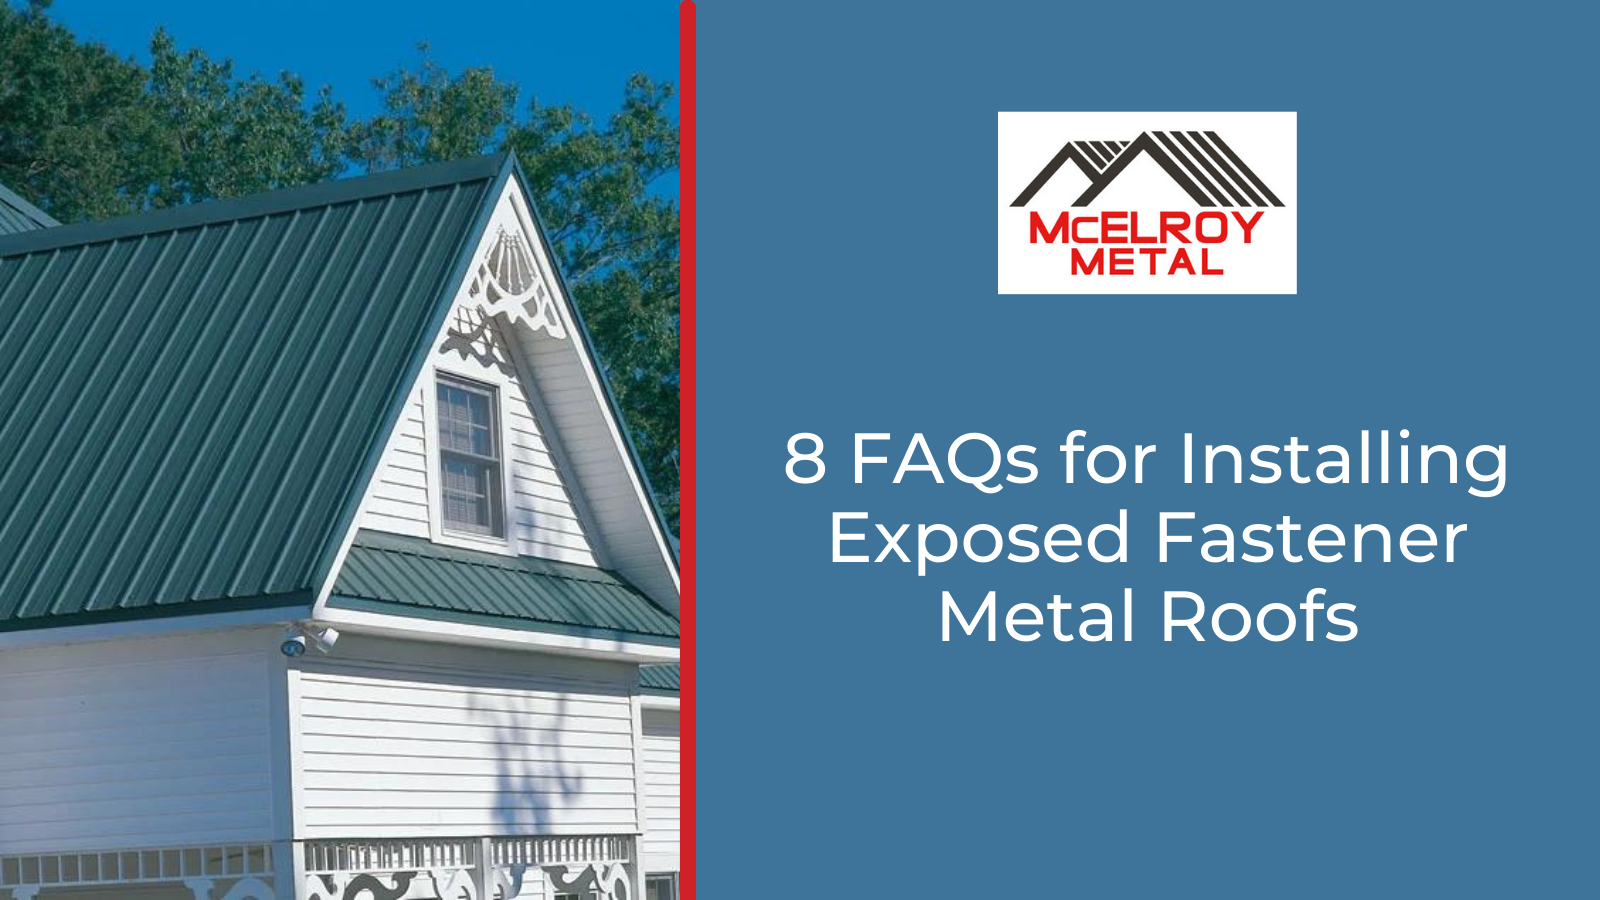 8 FAQs for Installing Exposed Fastener Metal Roofs